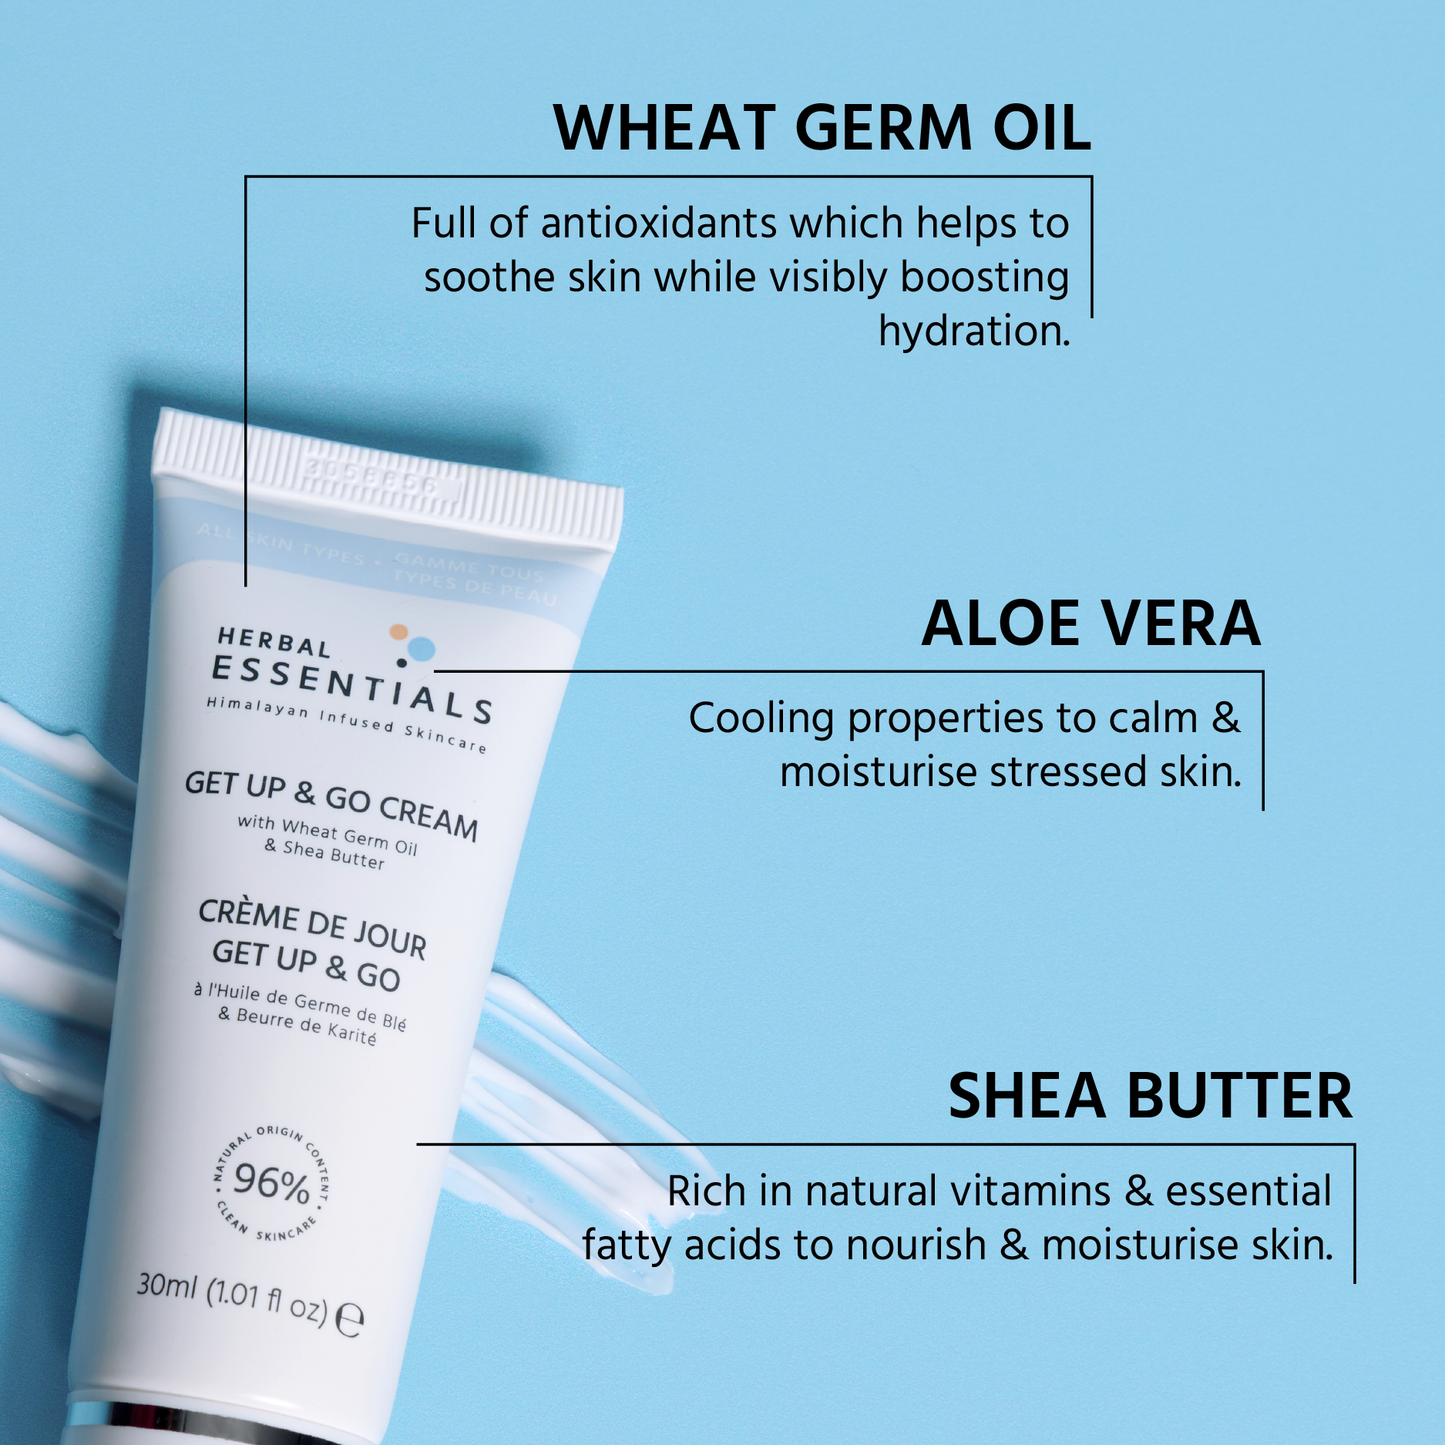 Herbal Essentials Get Up & Go Cream with Wheat Germ Oil & Shea Butter